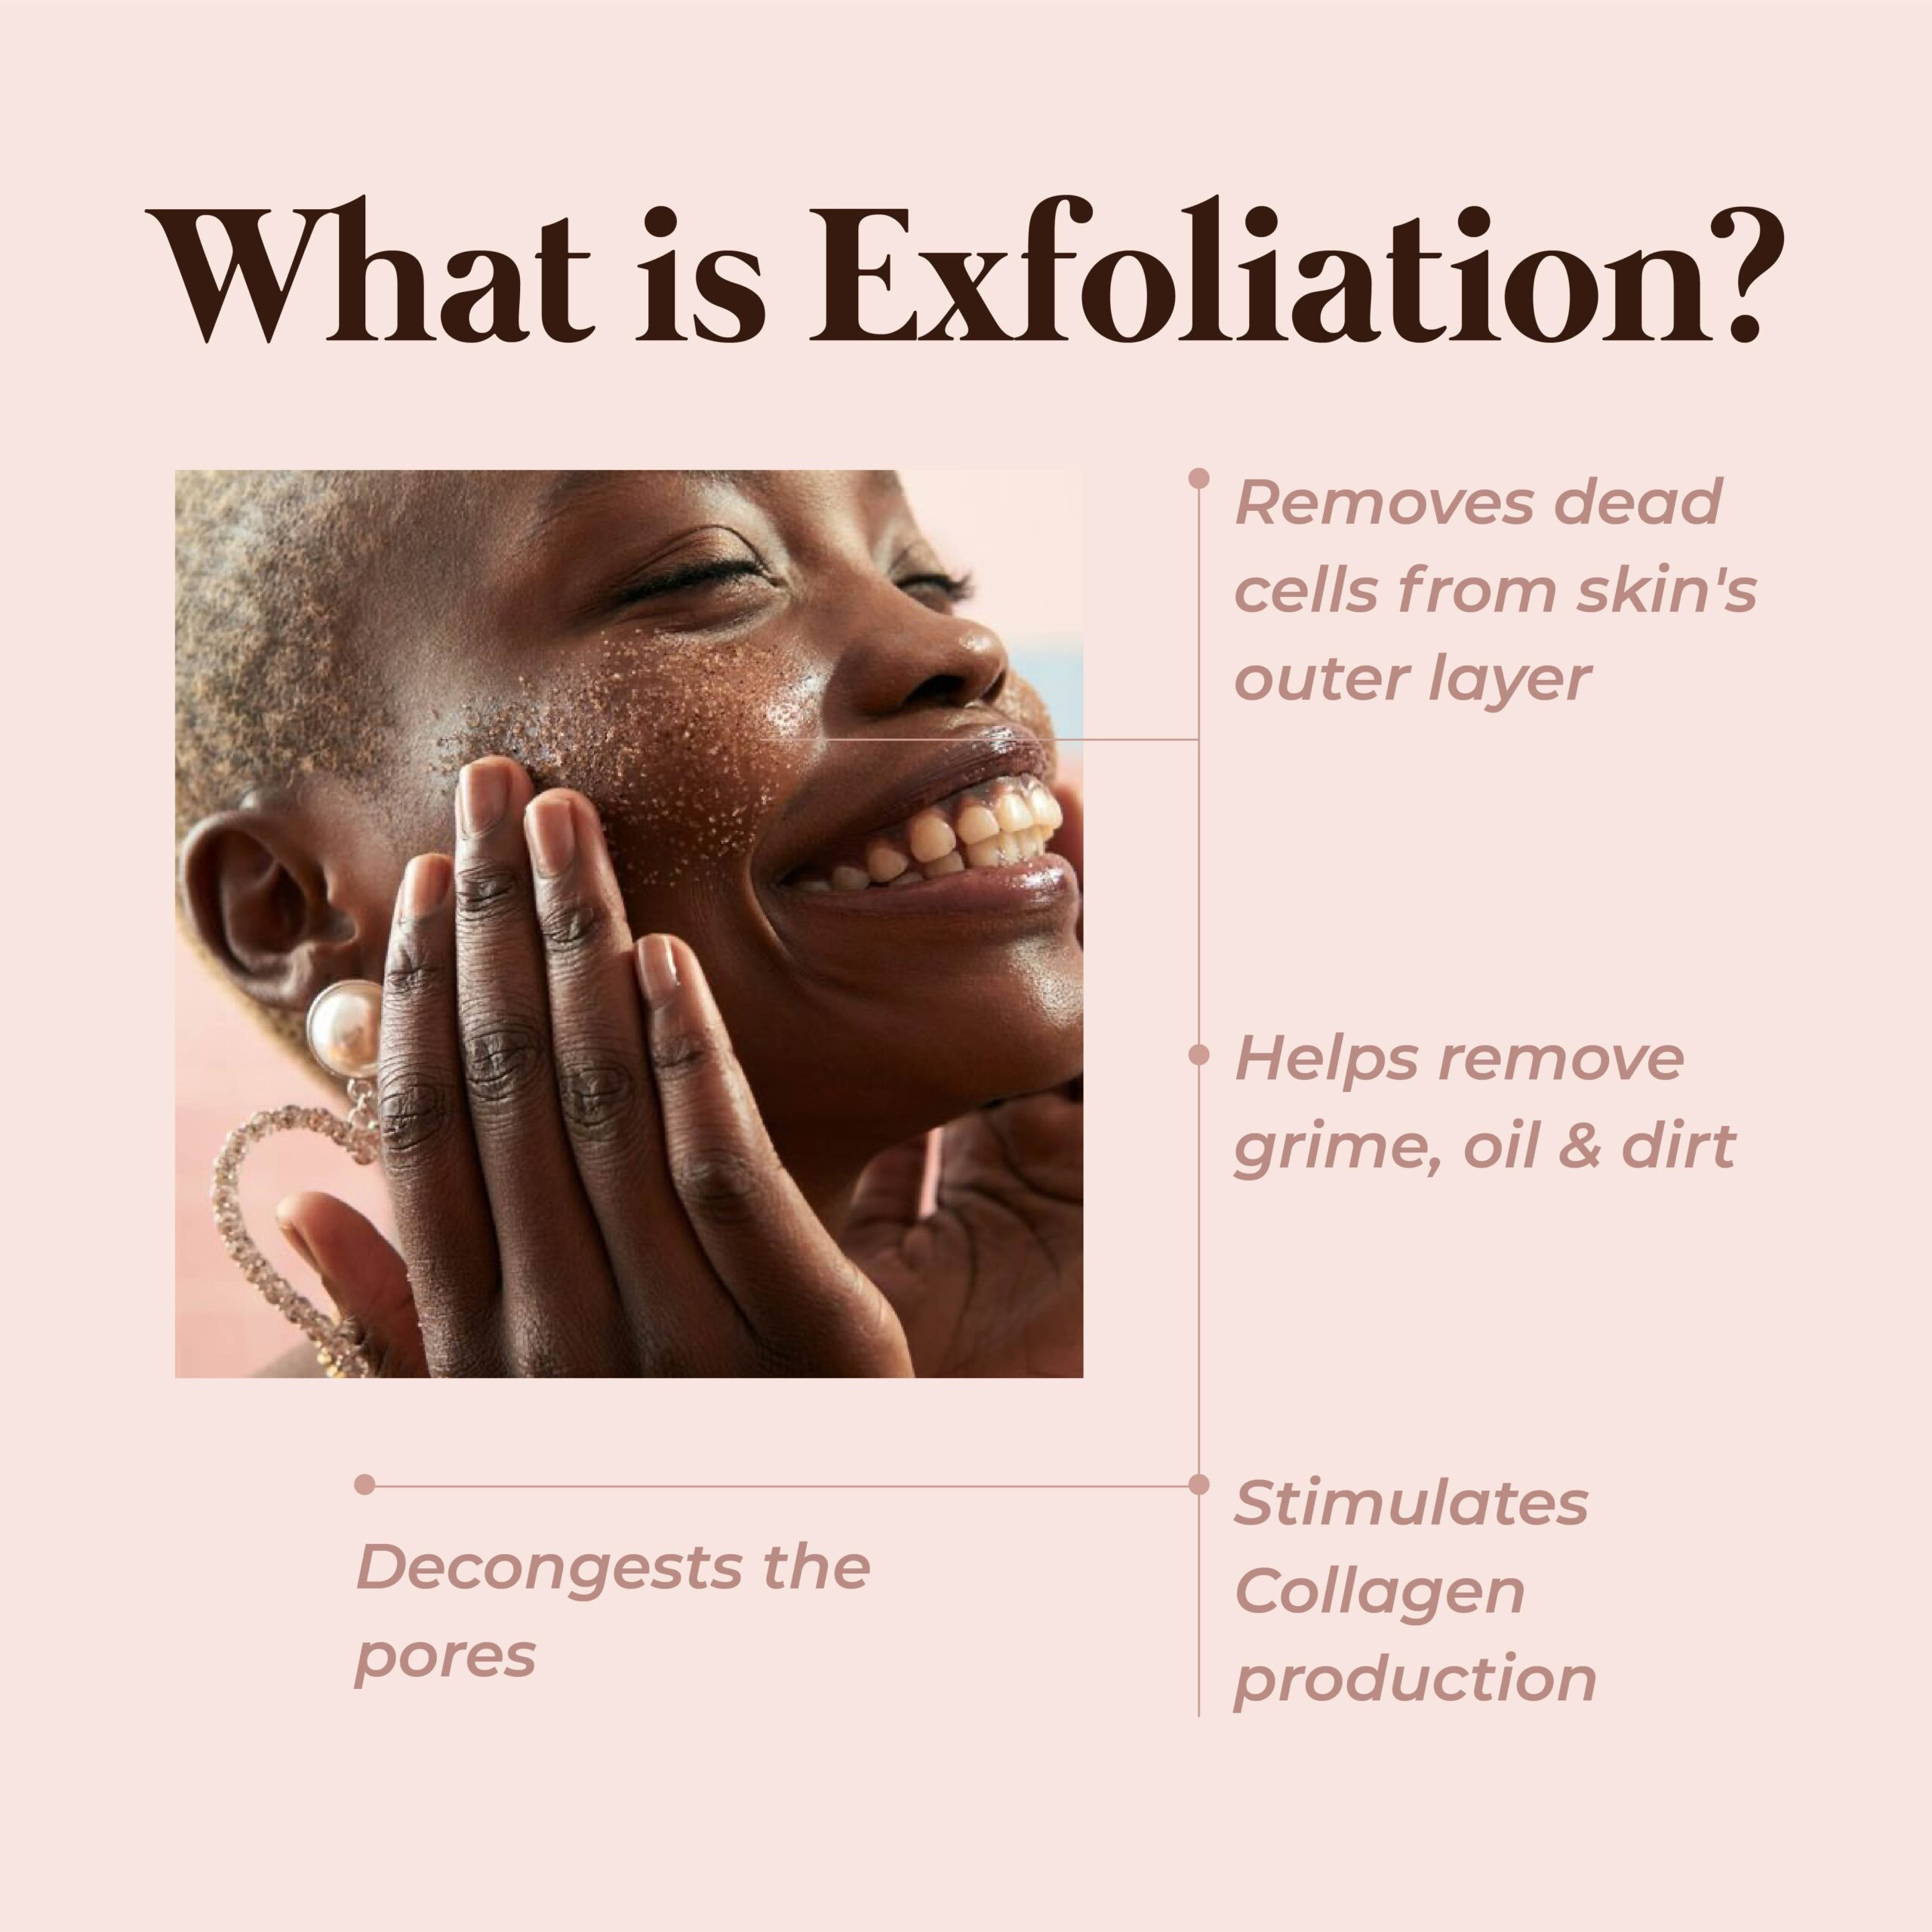 What is Skin Exfoliation